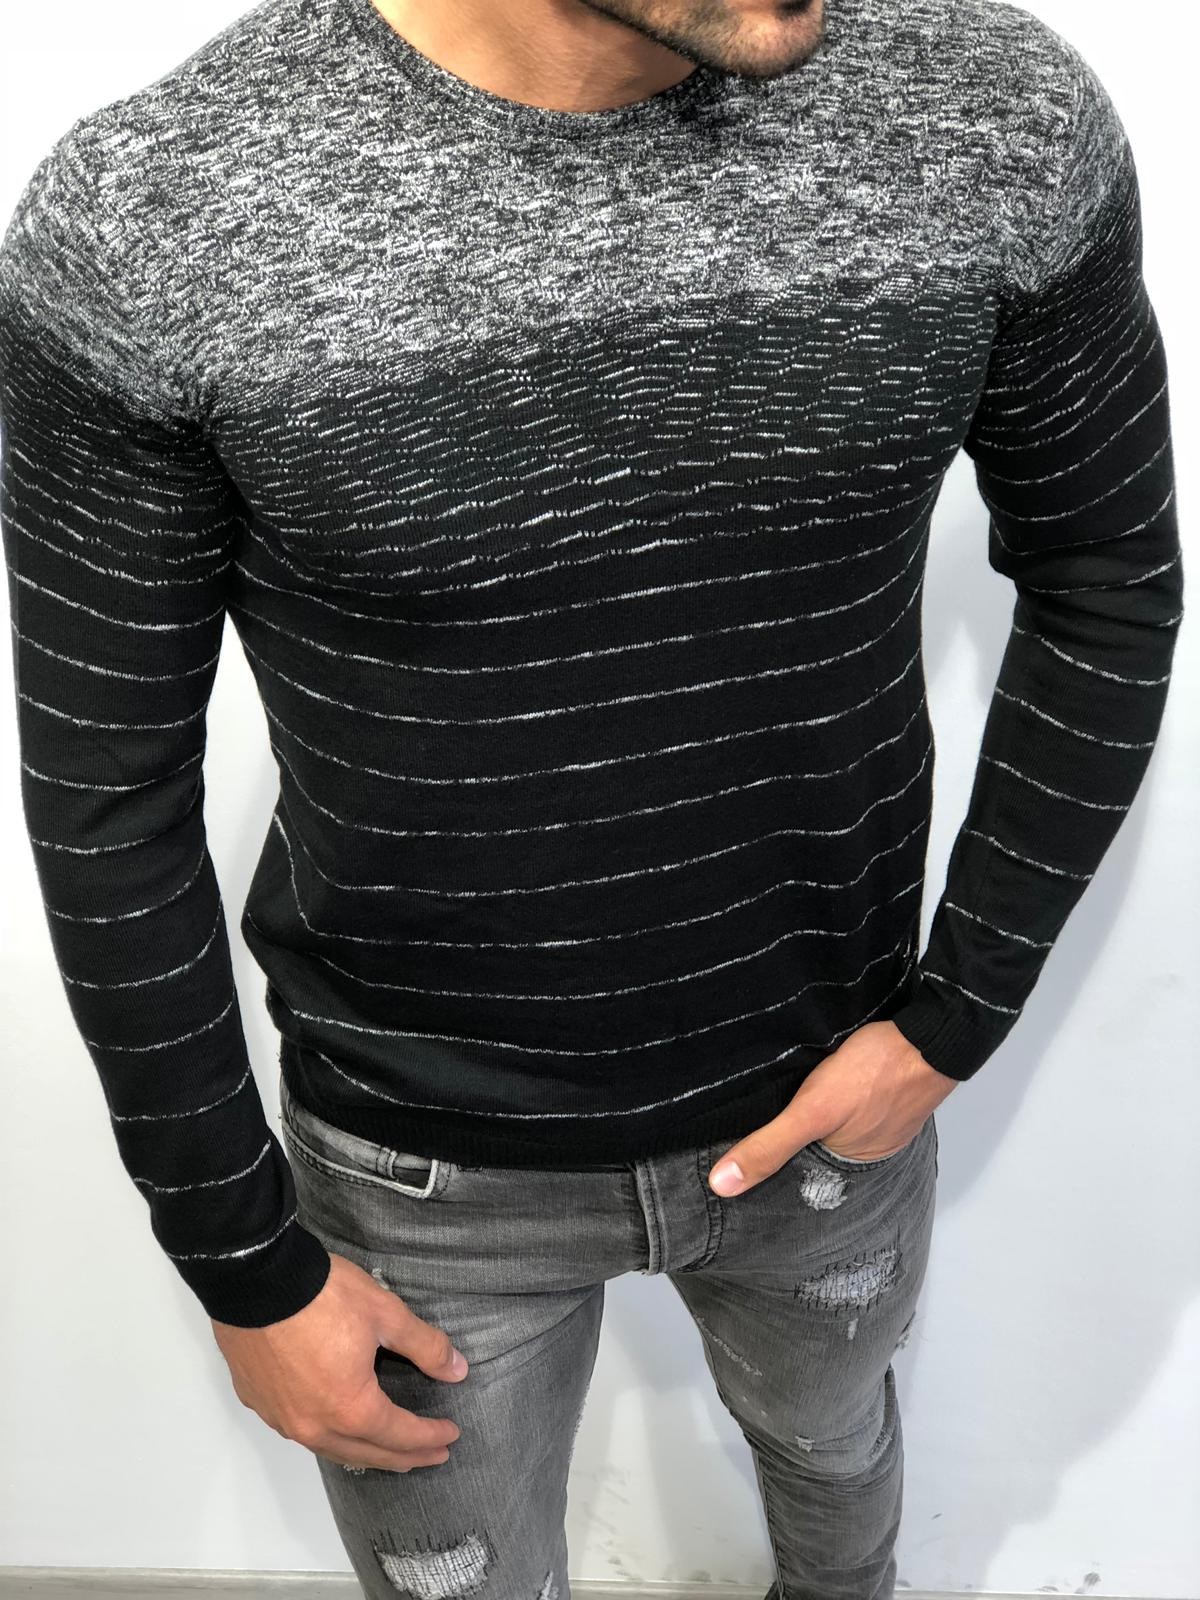 Buy Black Slim Fit Sweater by Gentwith.com with Free Shipping